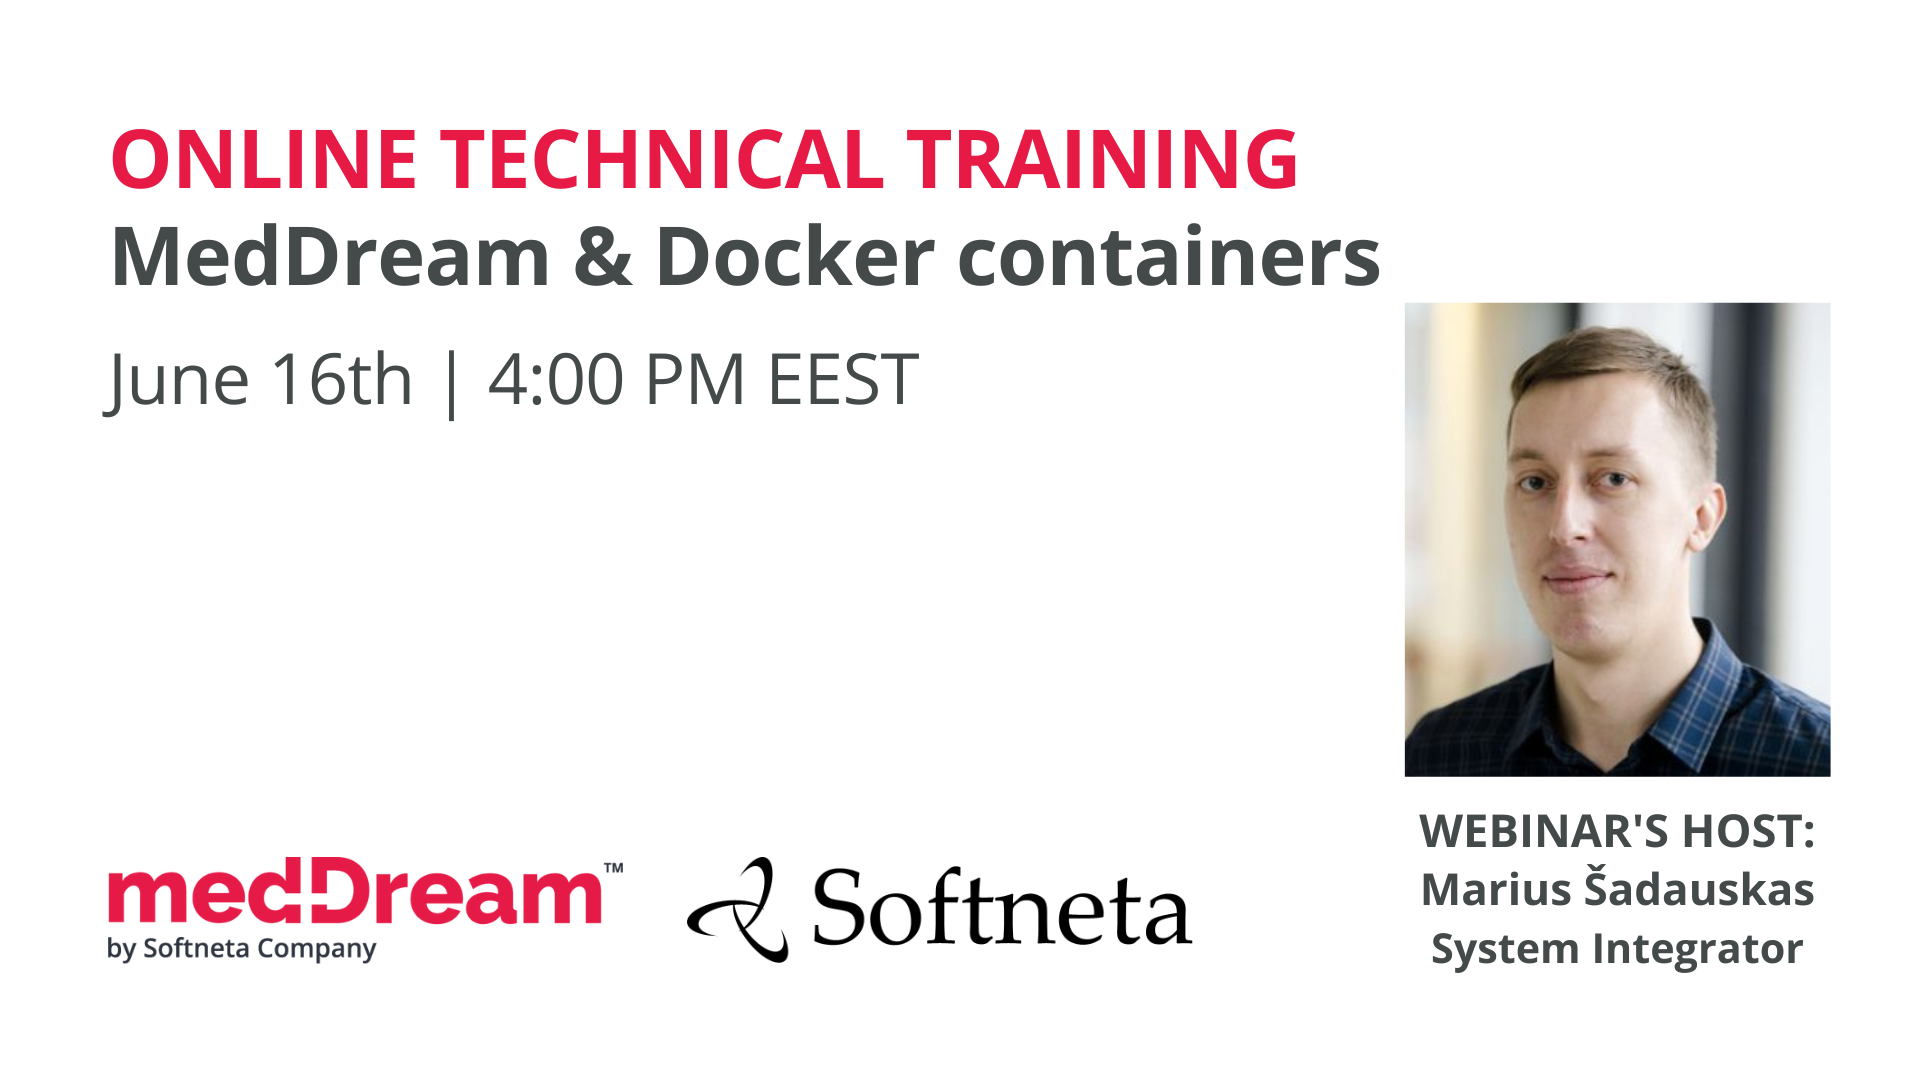 Tech training meddream dockers containers